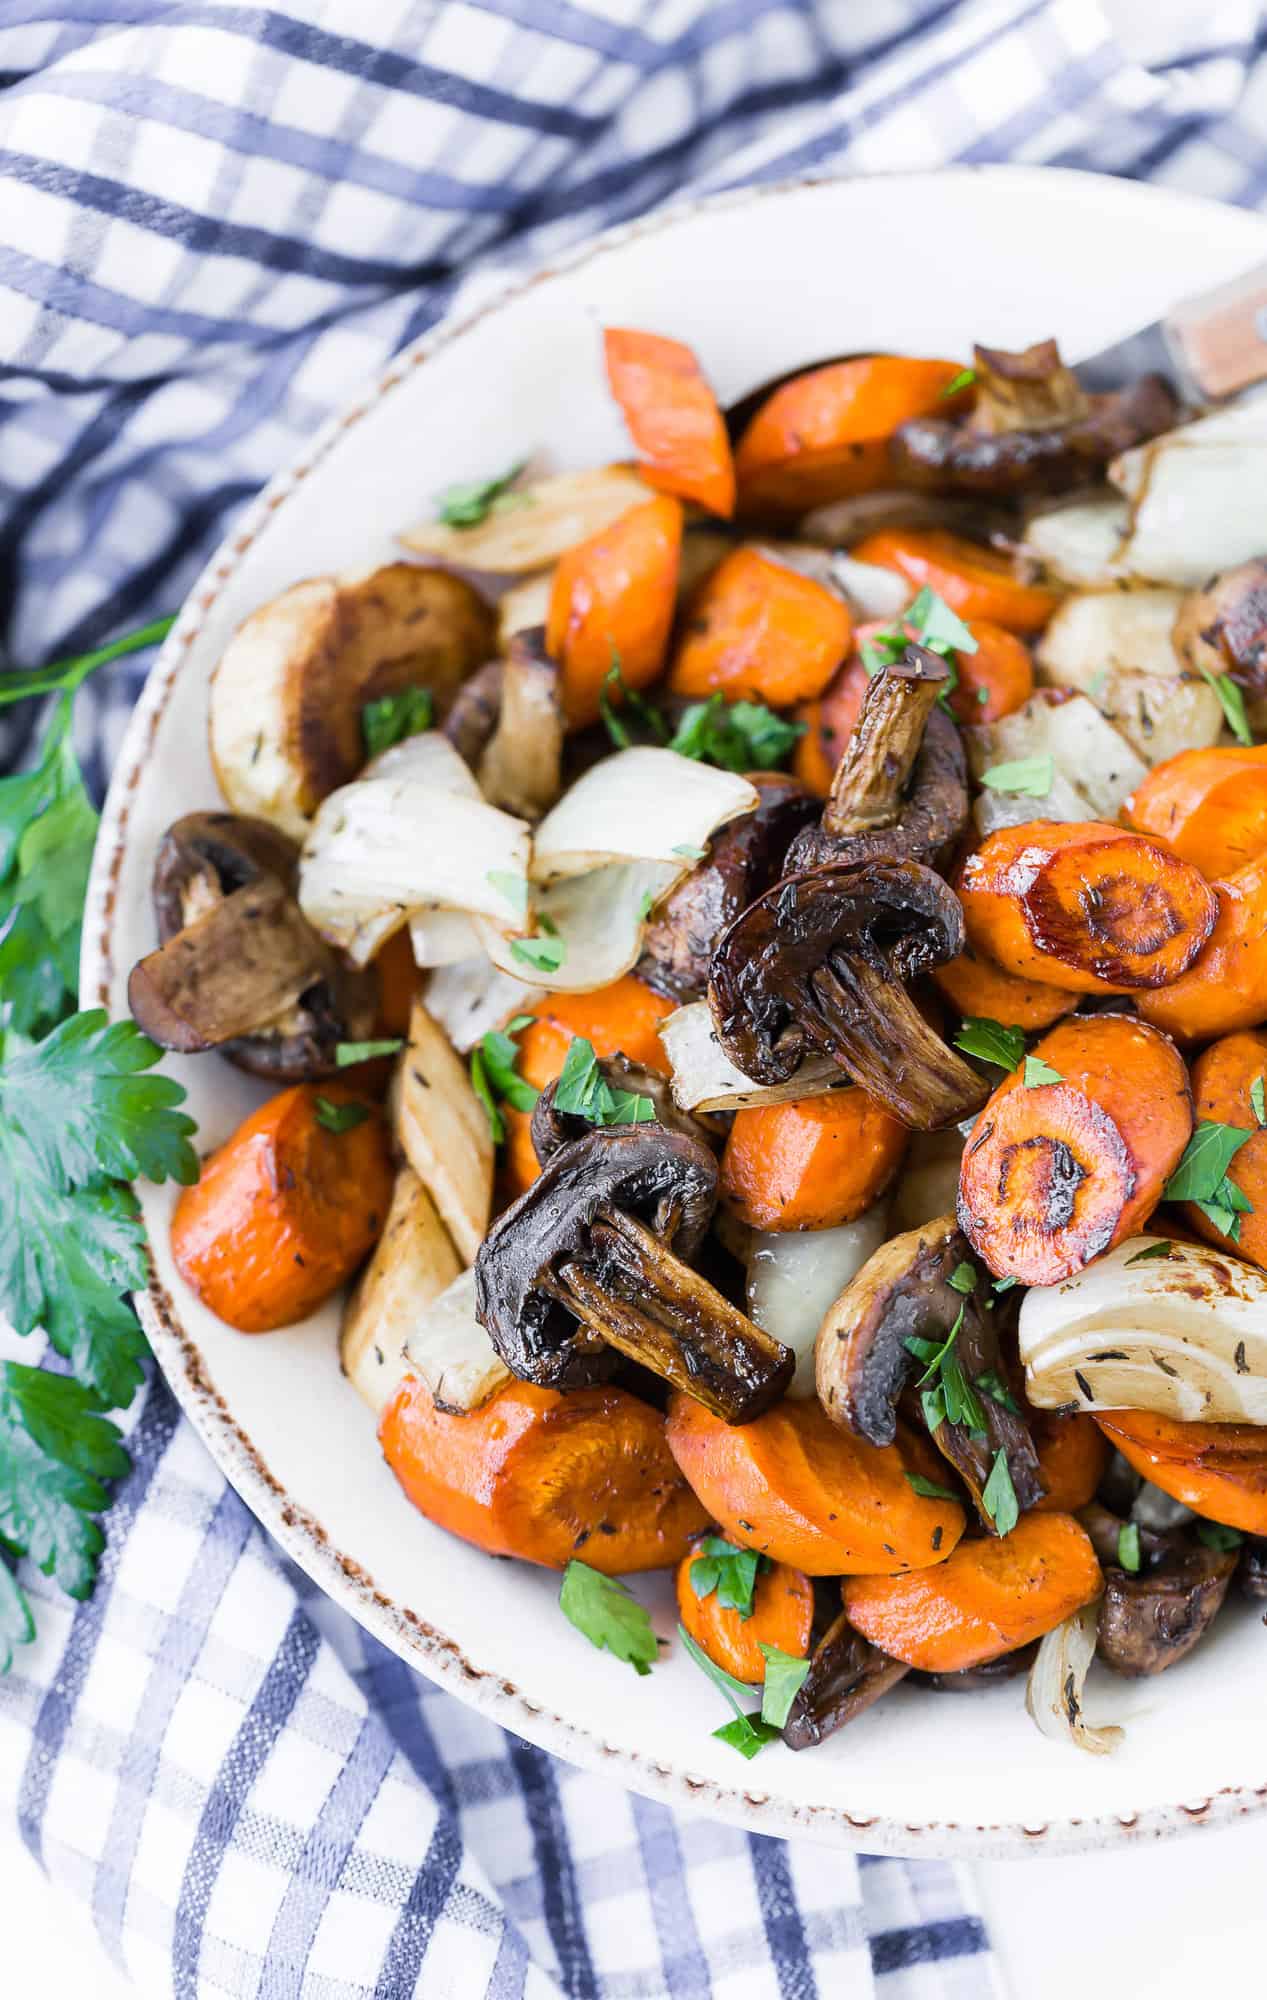 Balsamic roasted vegetables in a bowl, garnished with parsley.